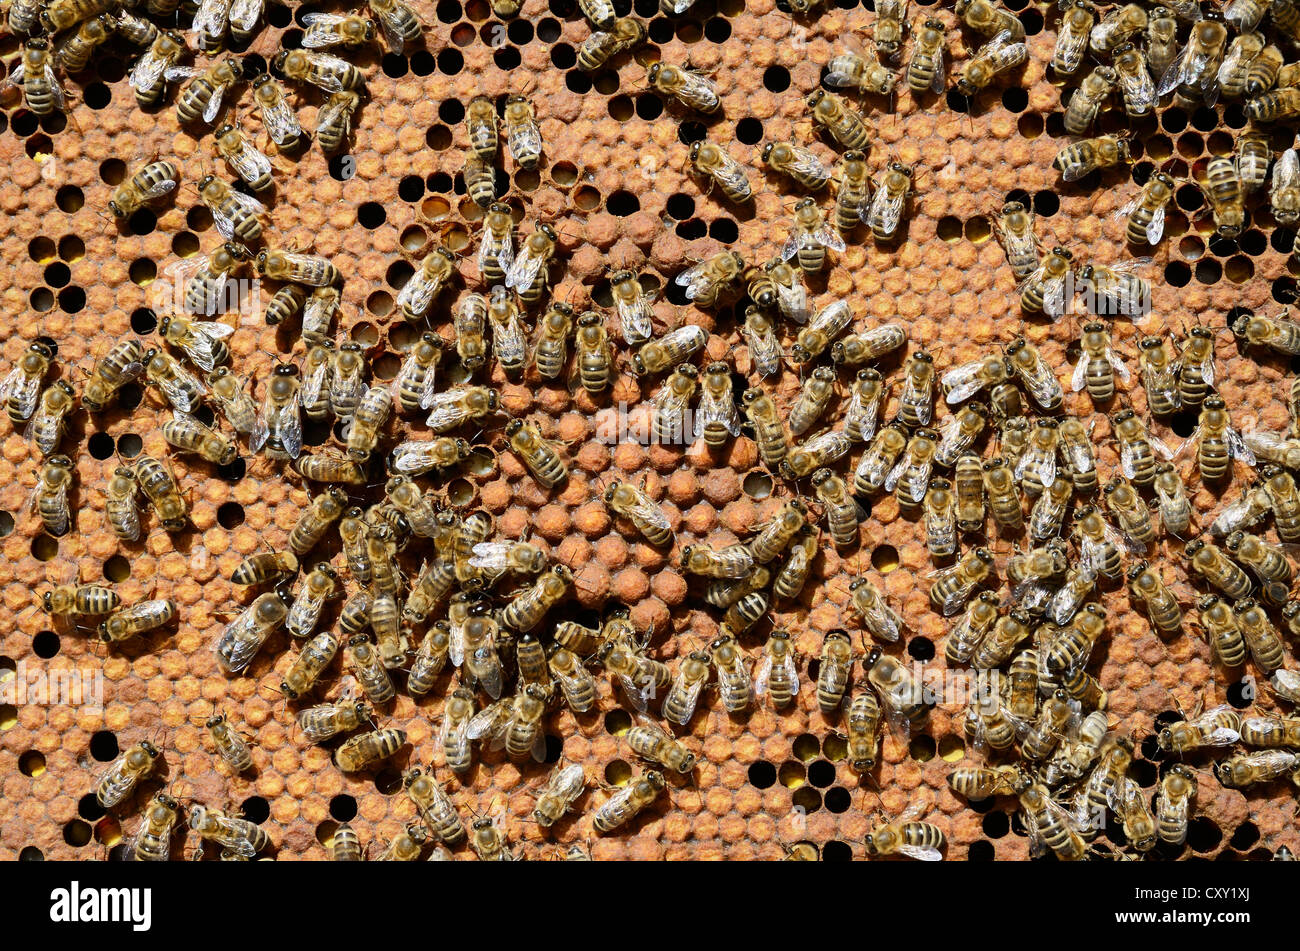 Brood comb with drone brood surrounded by worker bees (Apis mellifera var. carnica) Stock Photo